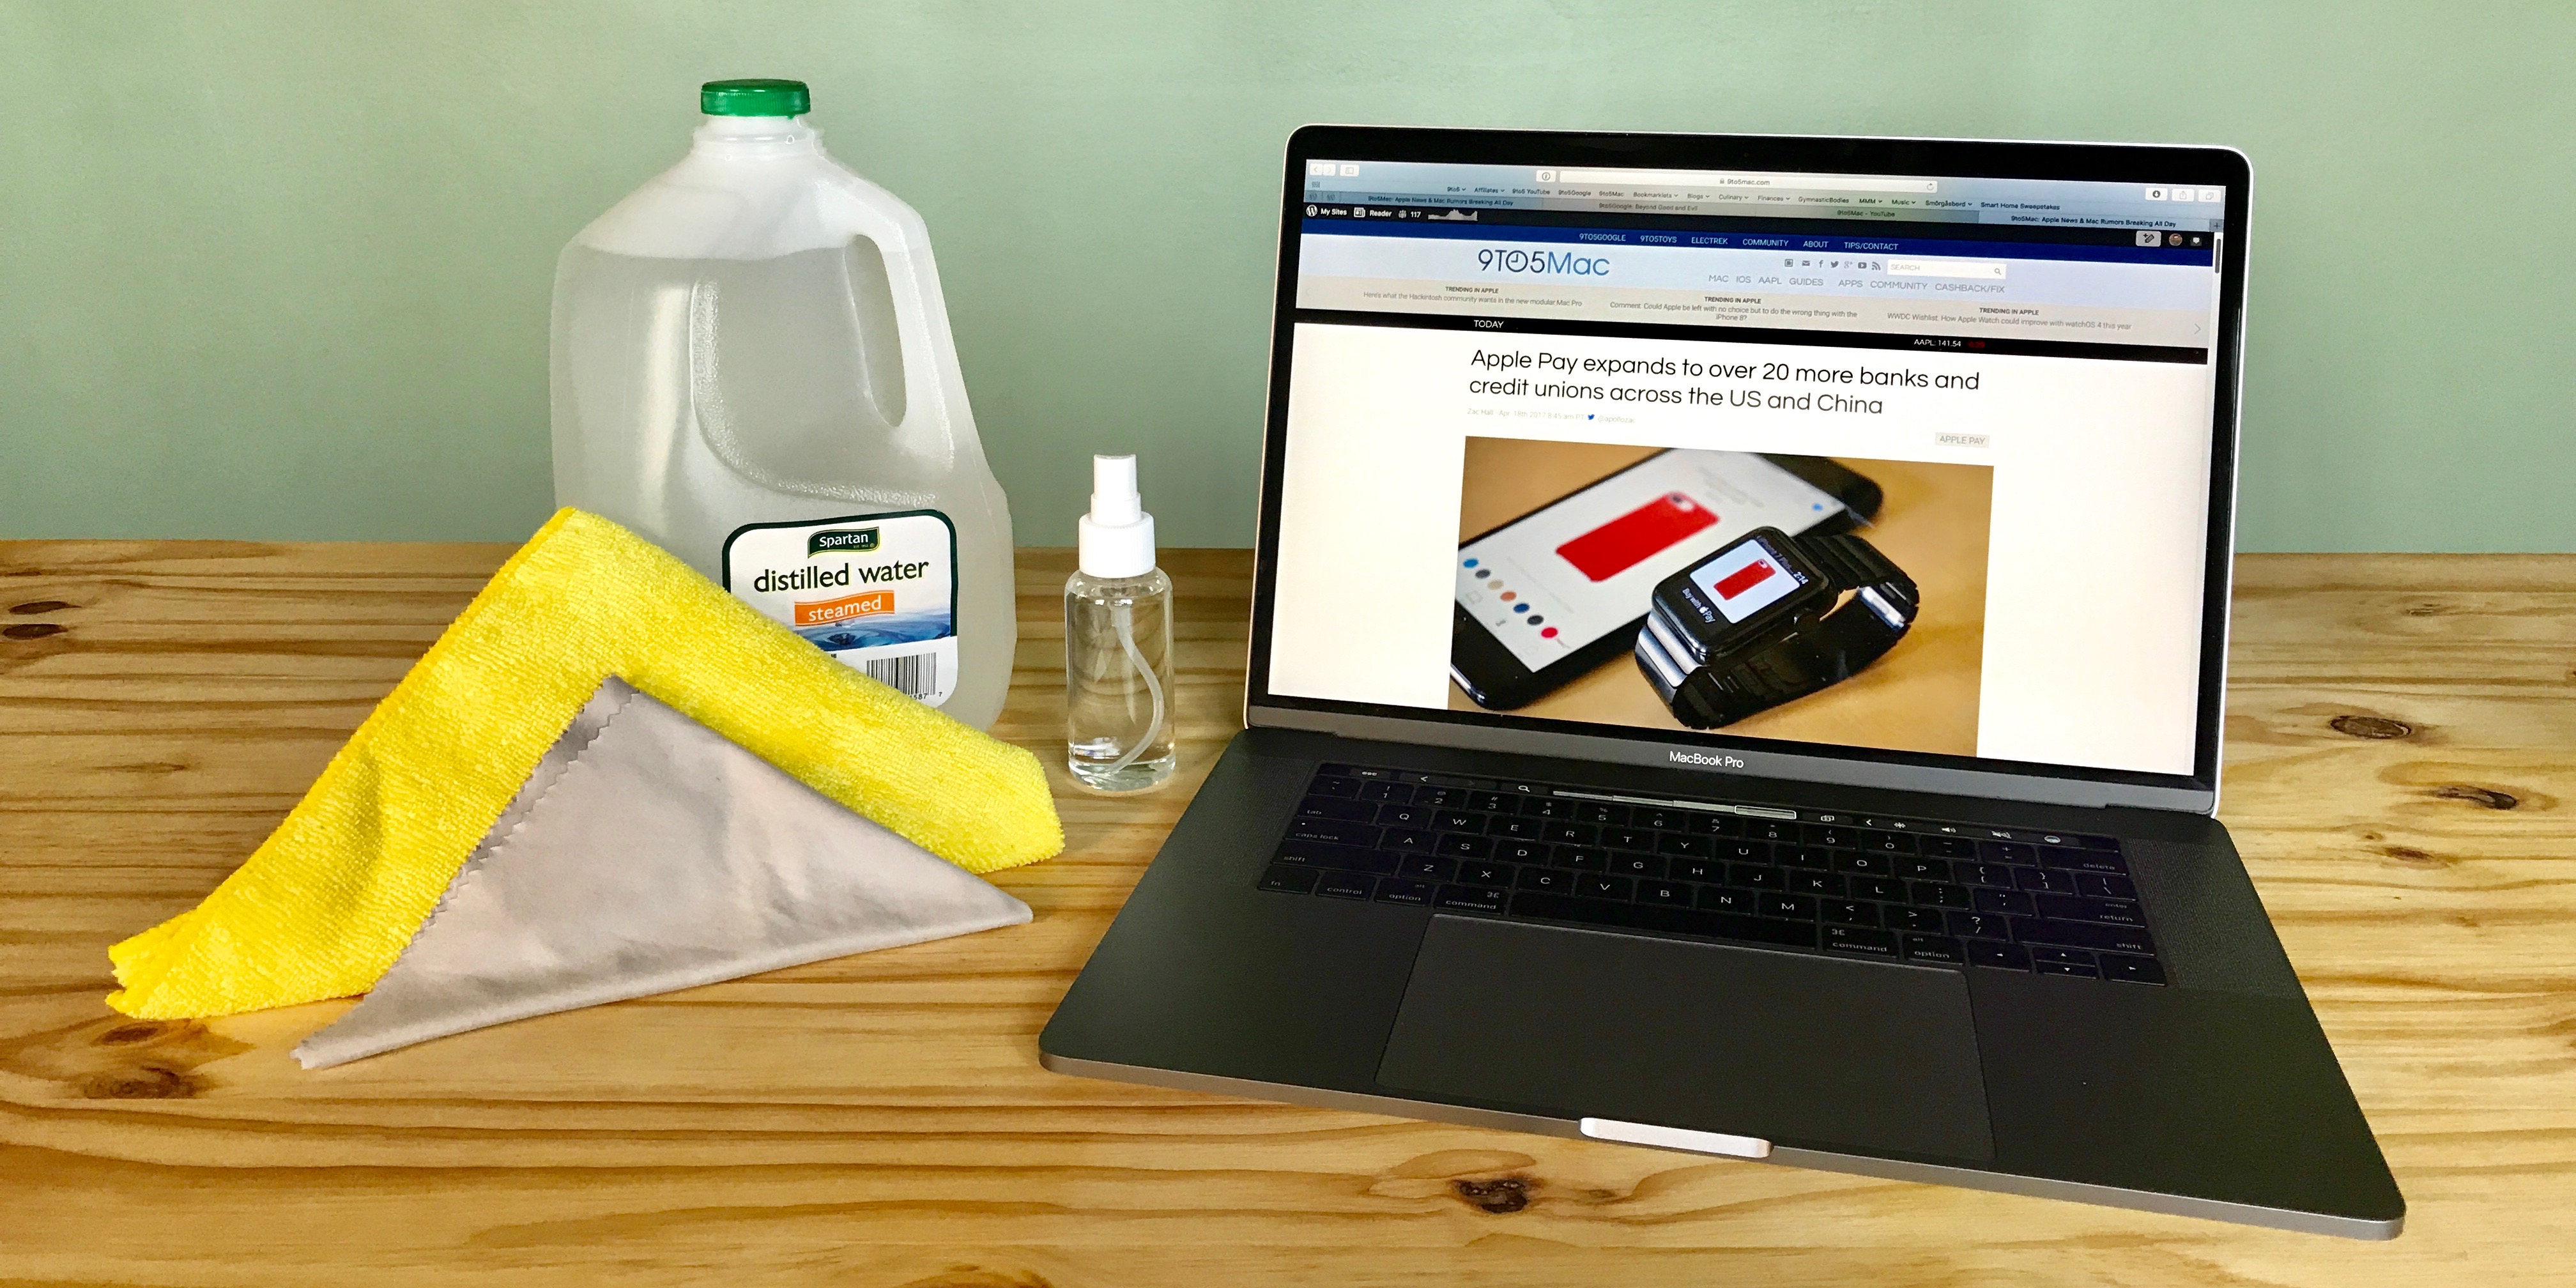 cleaner for macbook